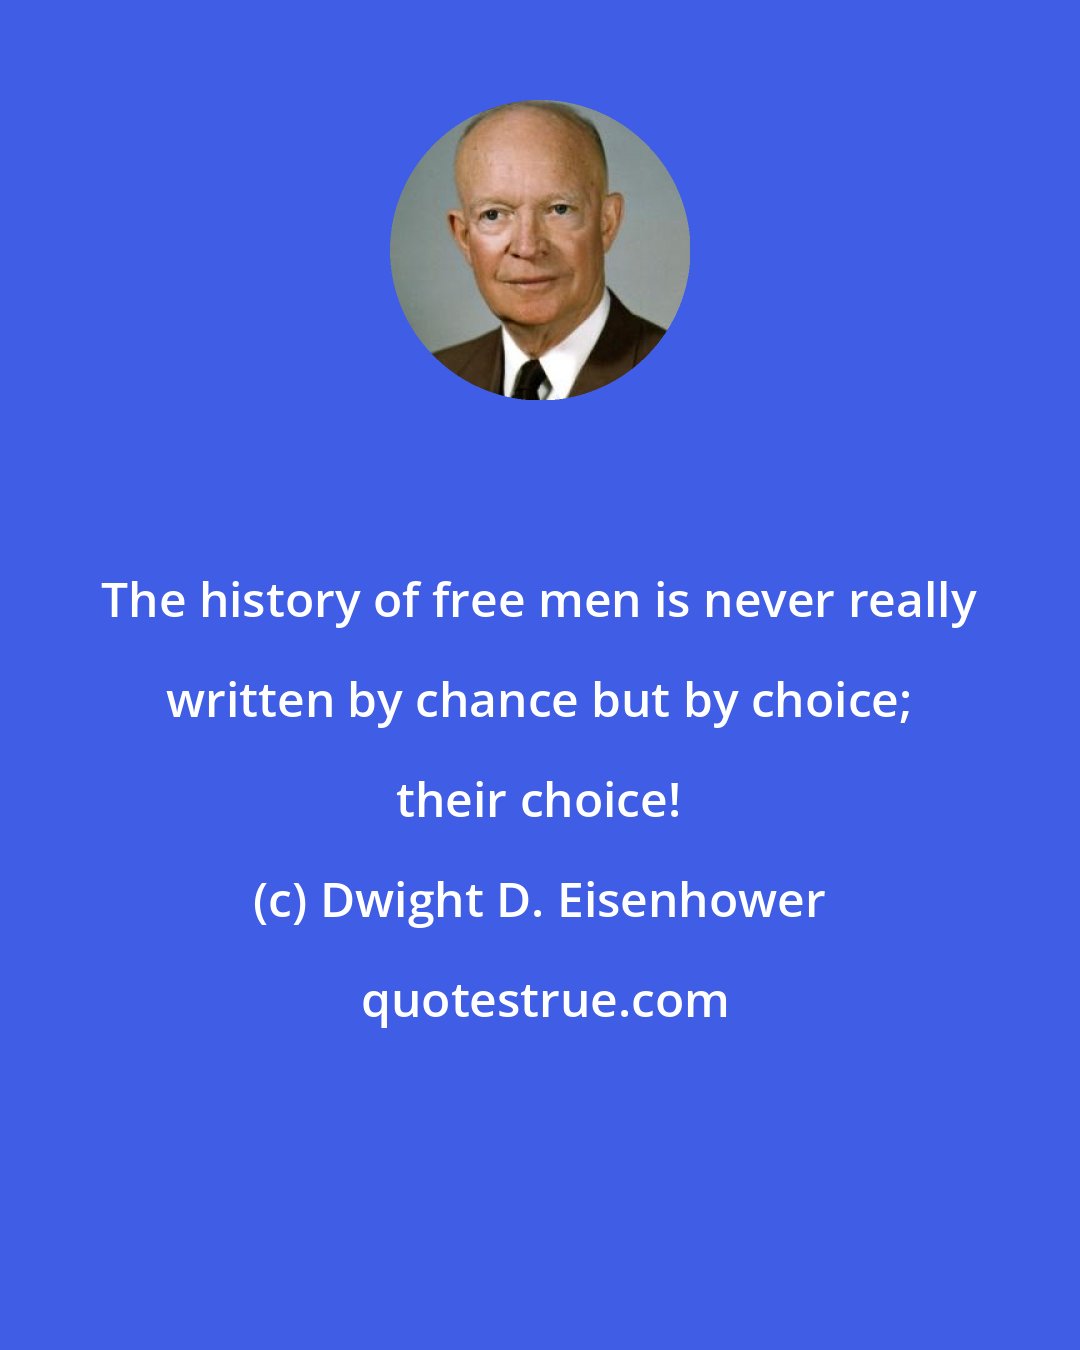 Dwight D. Eisenhower: The history of free men is never really written by chance but by choice; their choice!